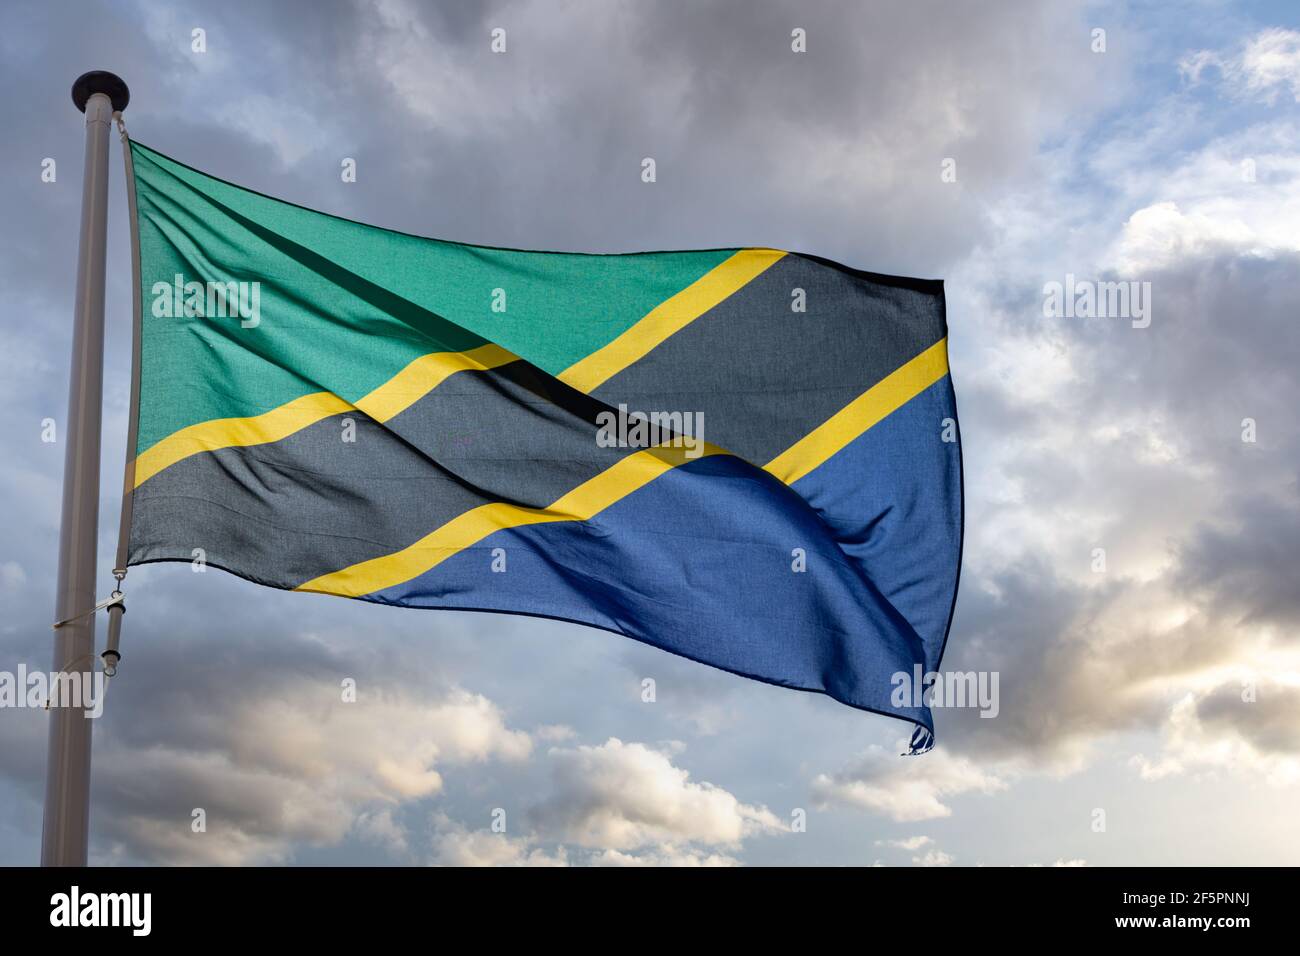 Tanzania sign symbol. United Republic of Tanzania national flag on a pole waving against cloudy sky background. Stock Photo